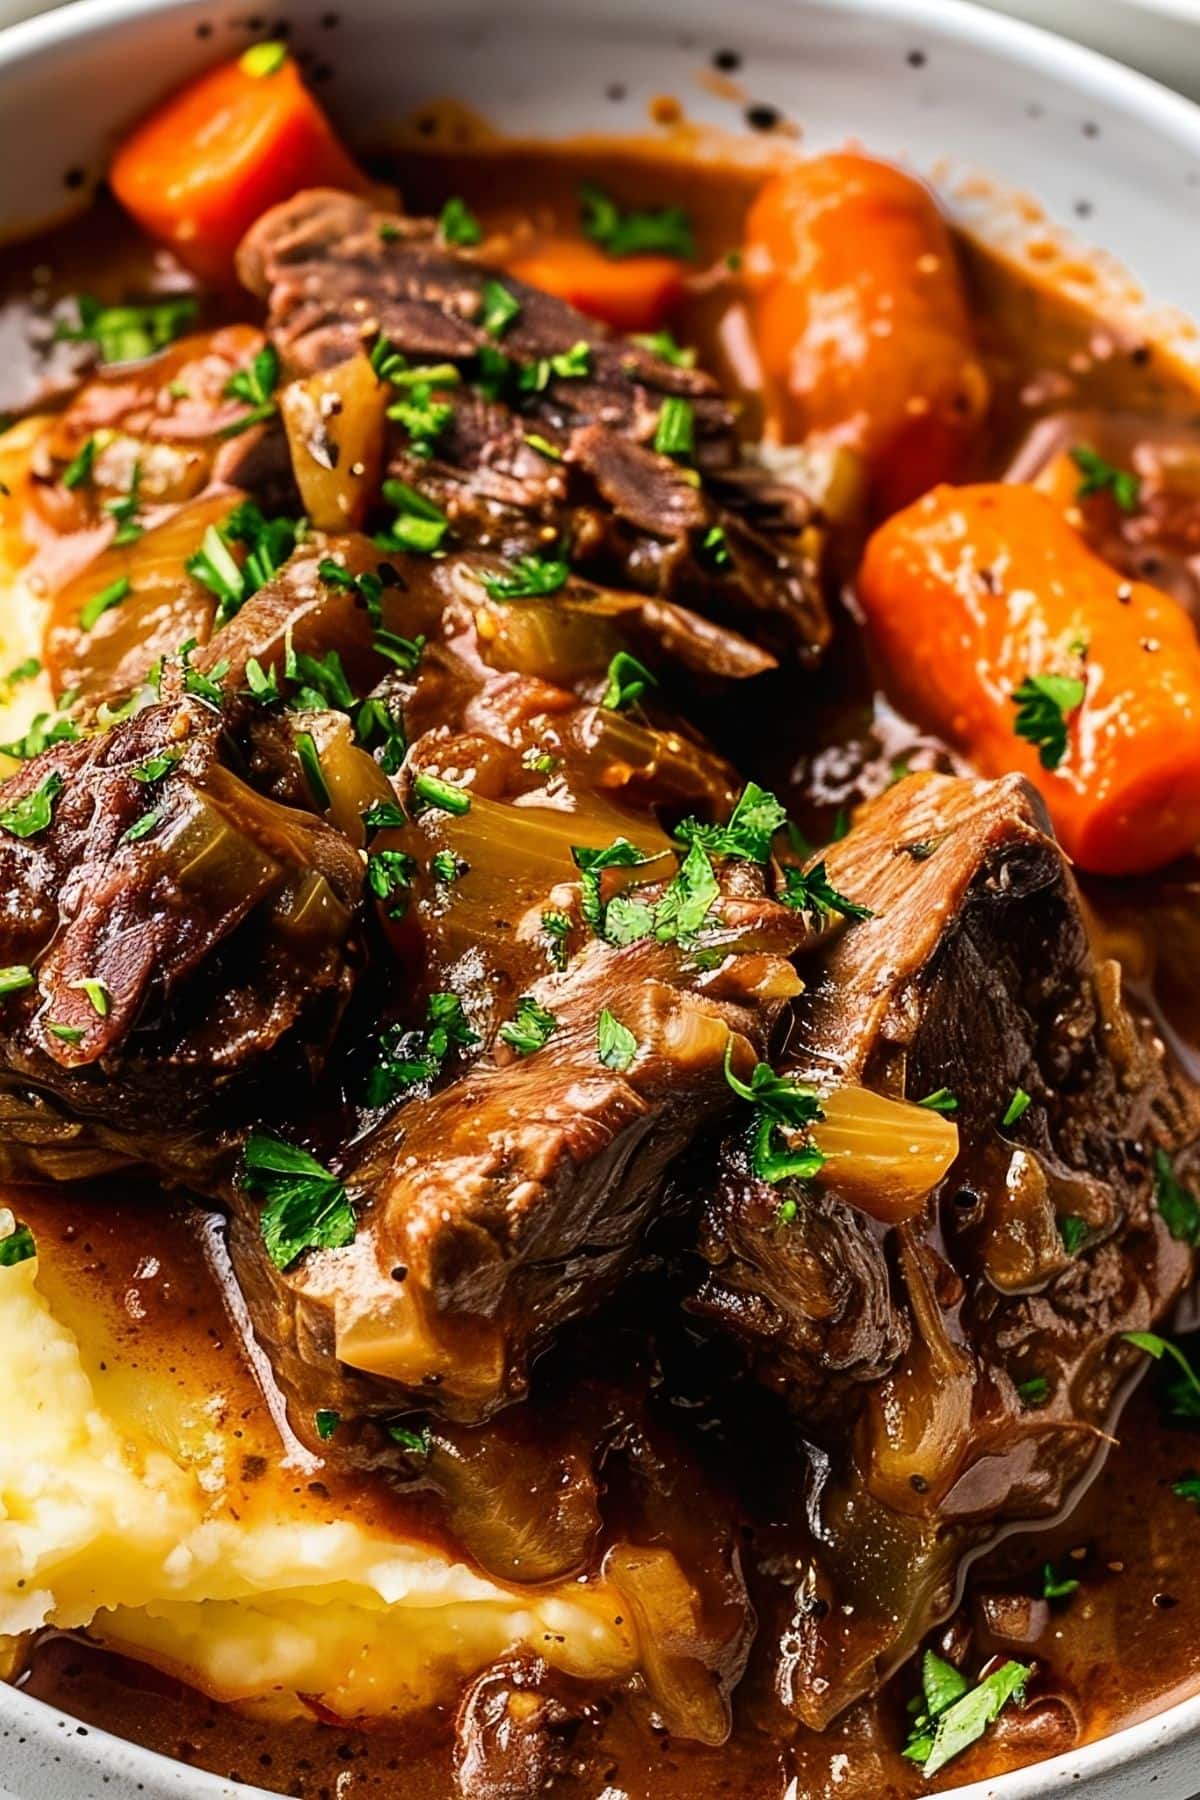 Super Close Up Guinness Beef Stew with Meaty Chunks of Succulent Beef, Carrots, and Parsley over Mashed Potatoes